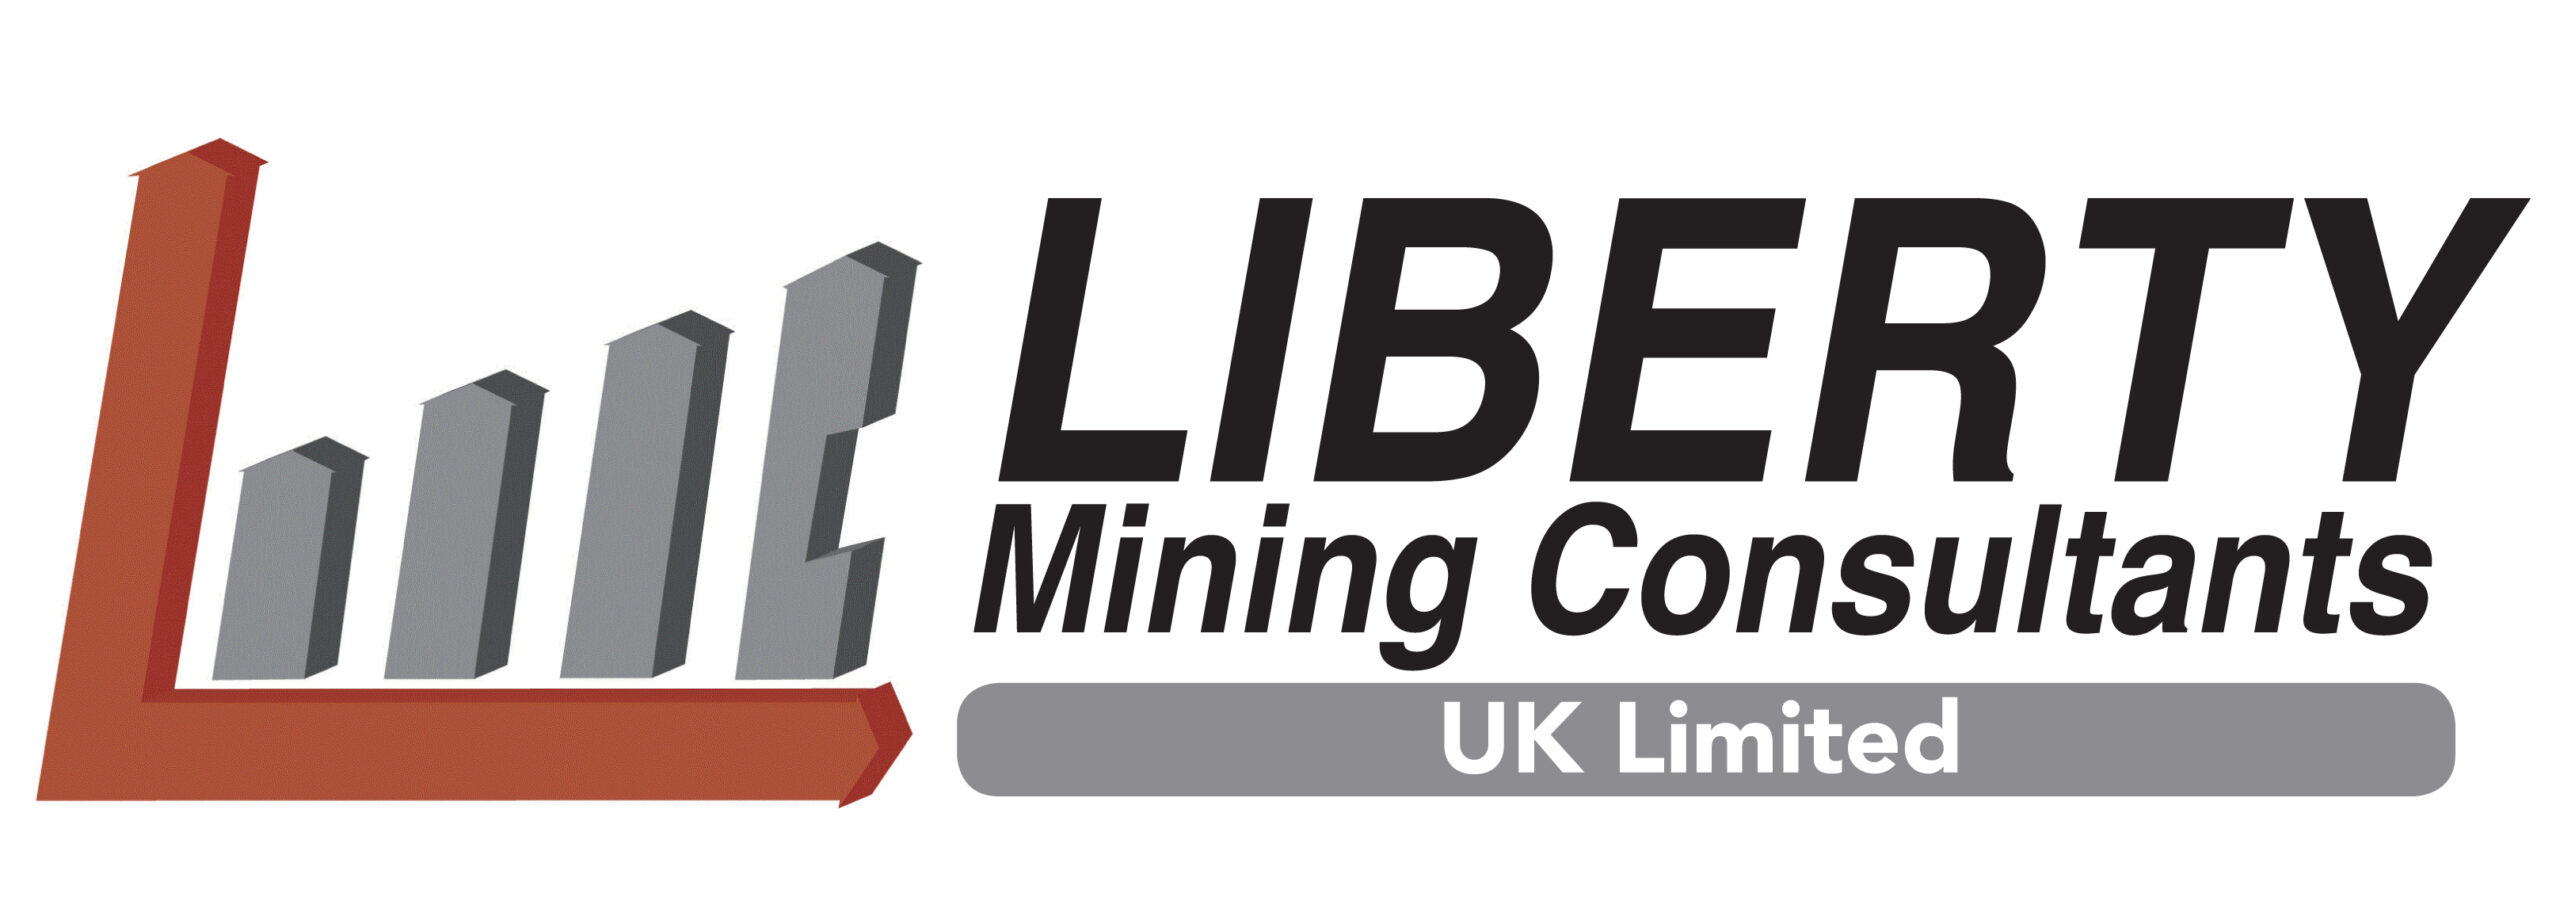 Liberty Mining Consultants UK Limited_LOGO.indd